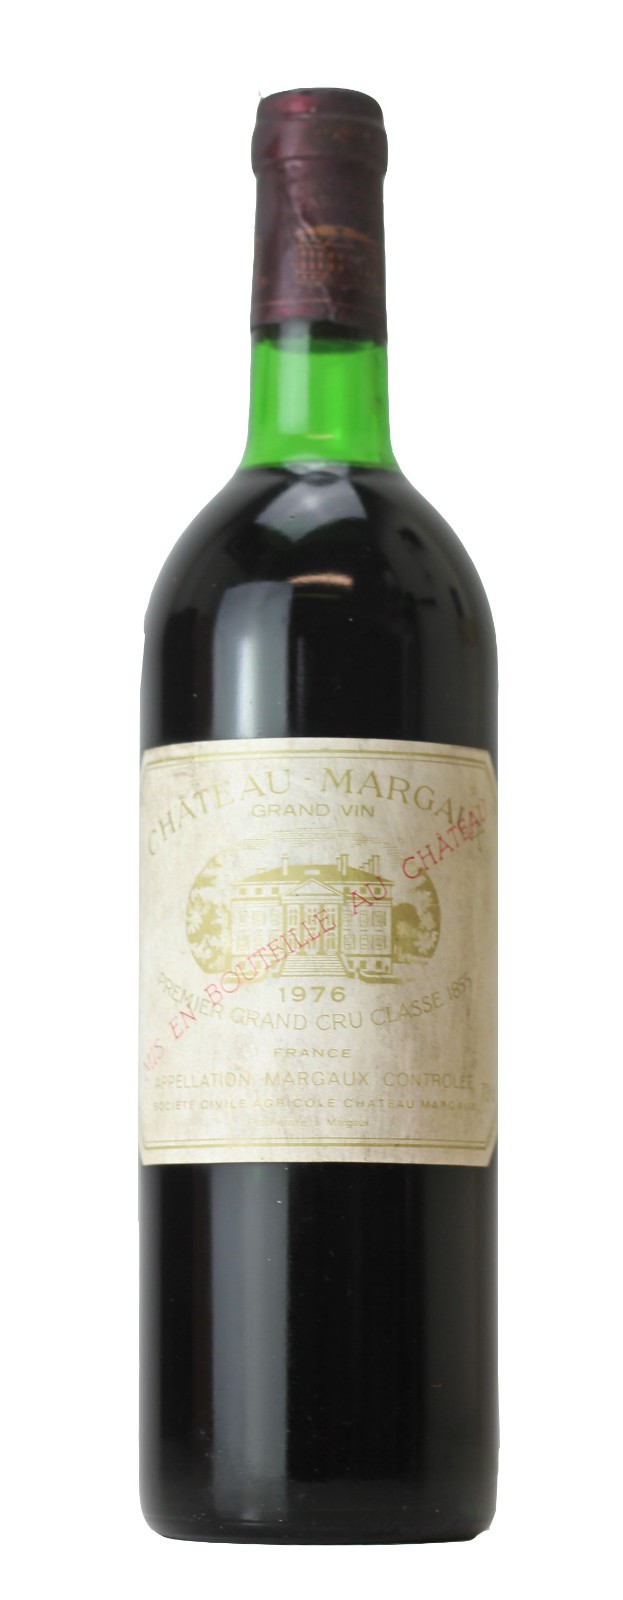 Chateau Margaux, 1976 | Vintage Wine and Port